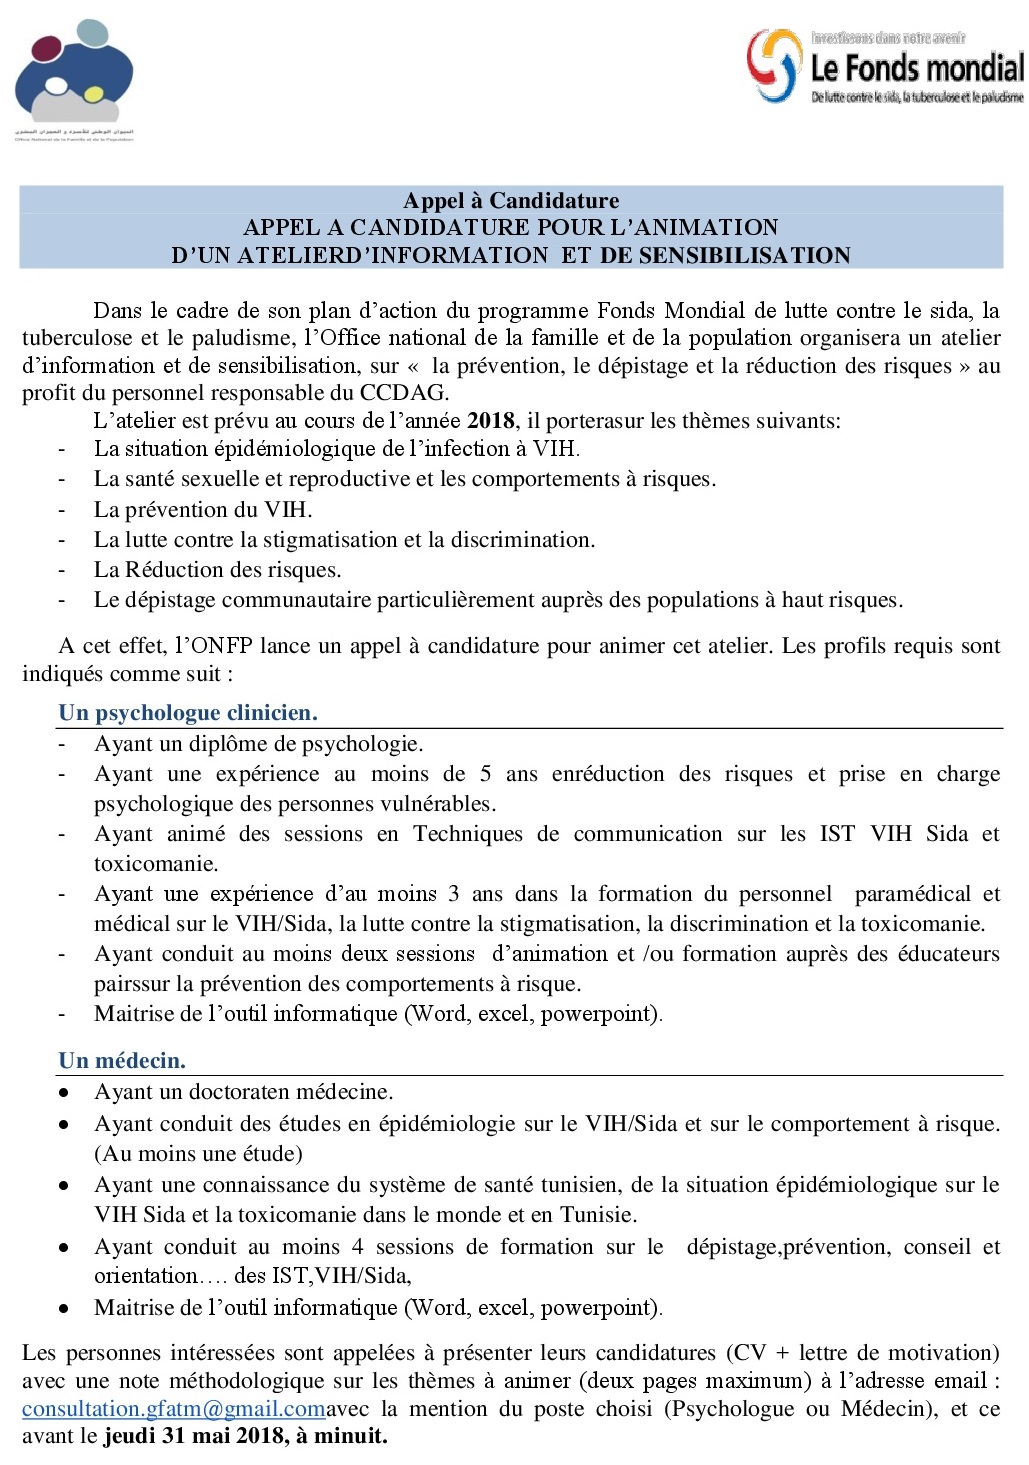 2 Appel candidature 31 mai ONFP 2018 001